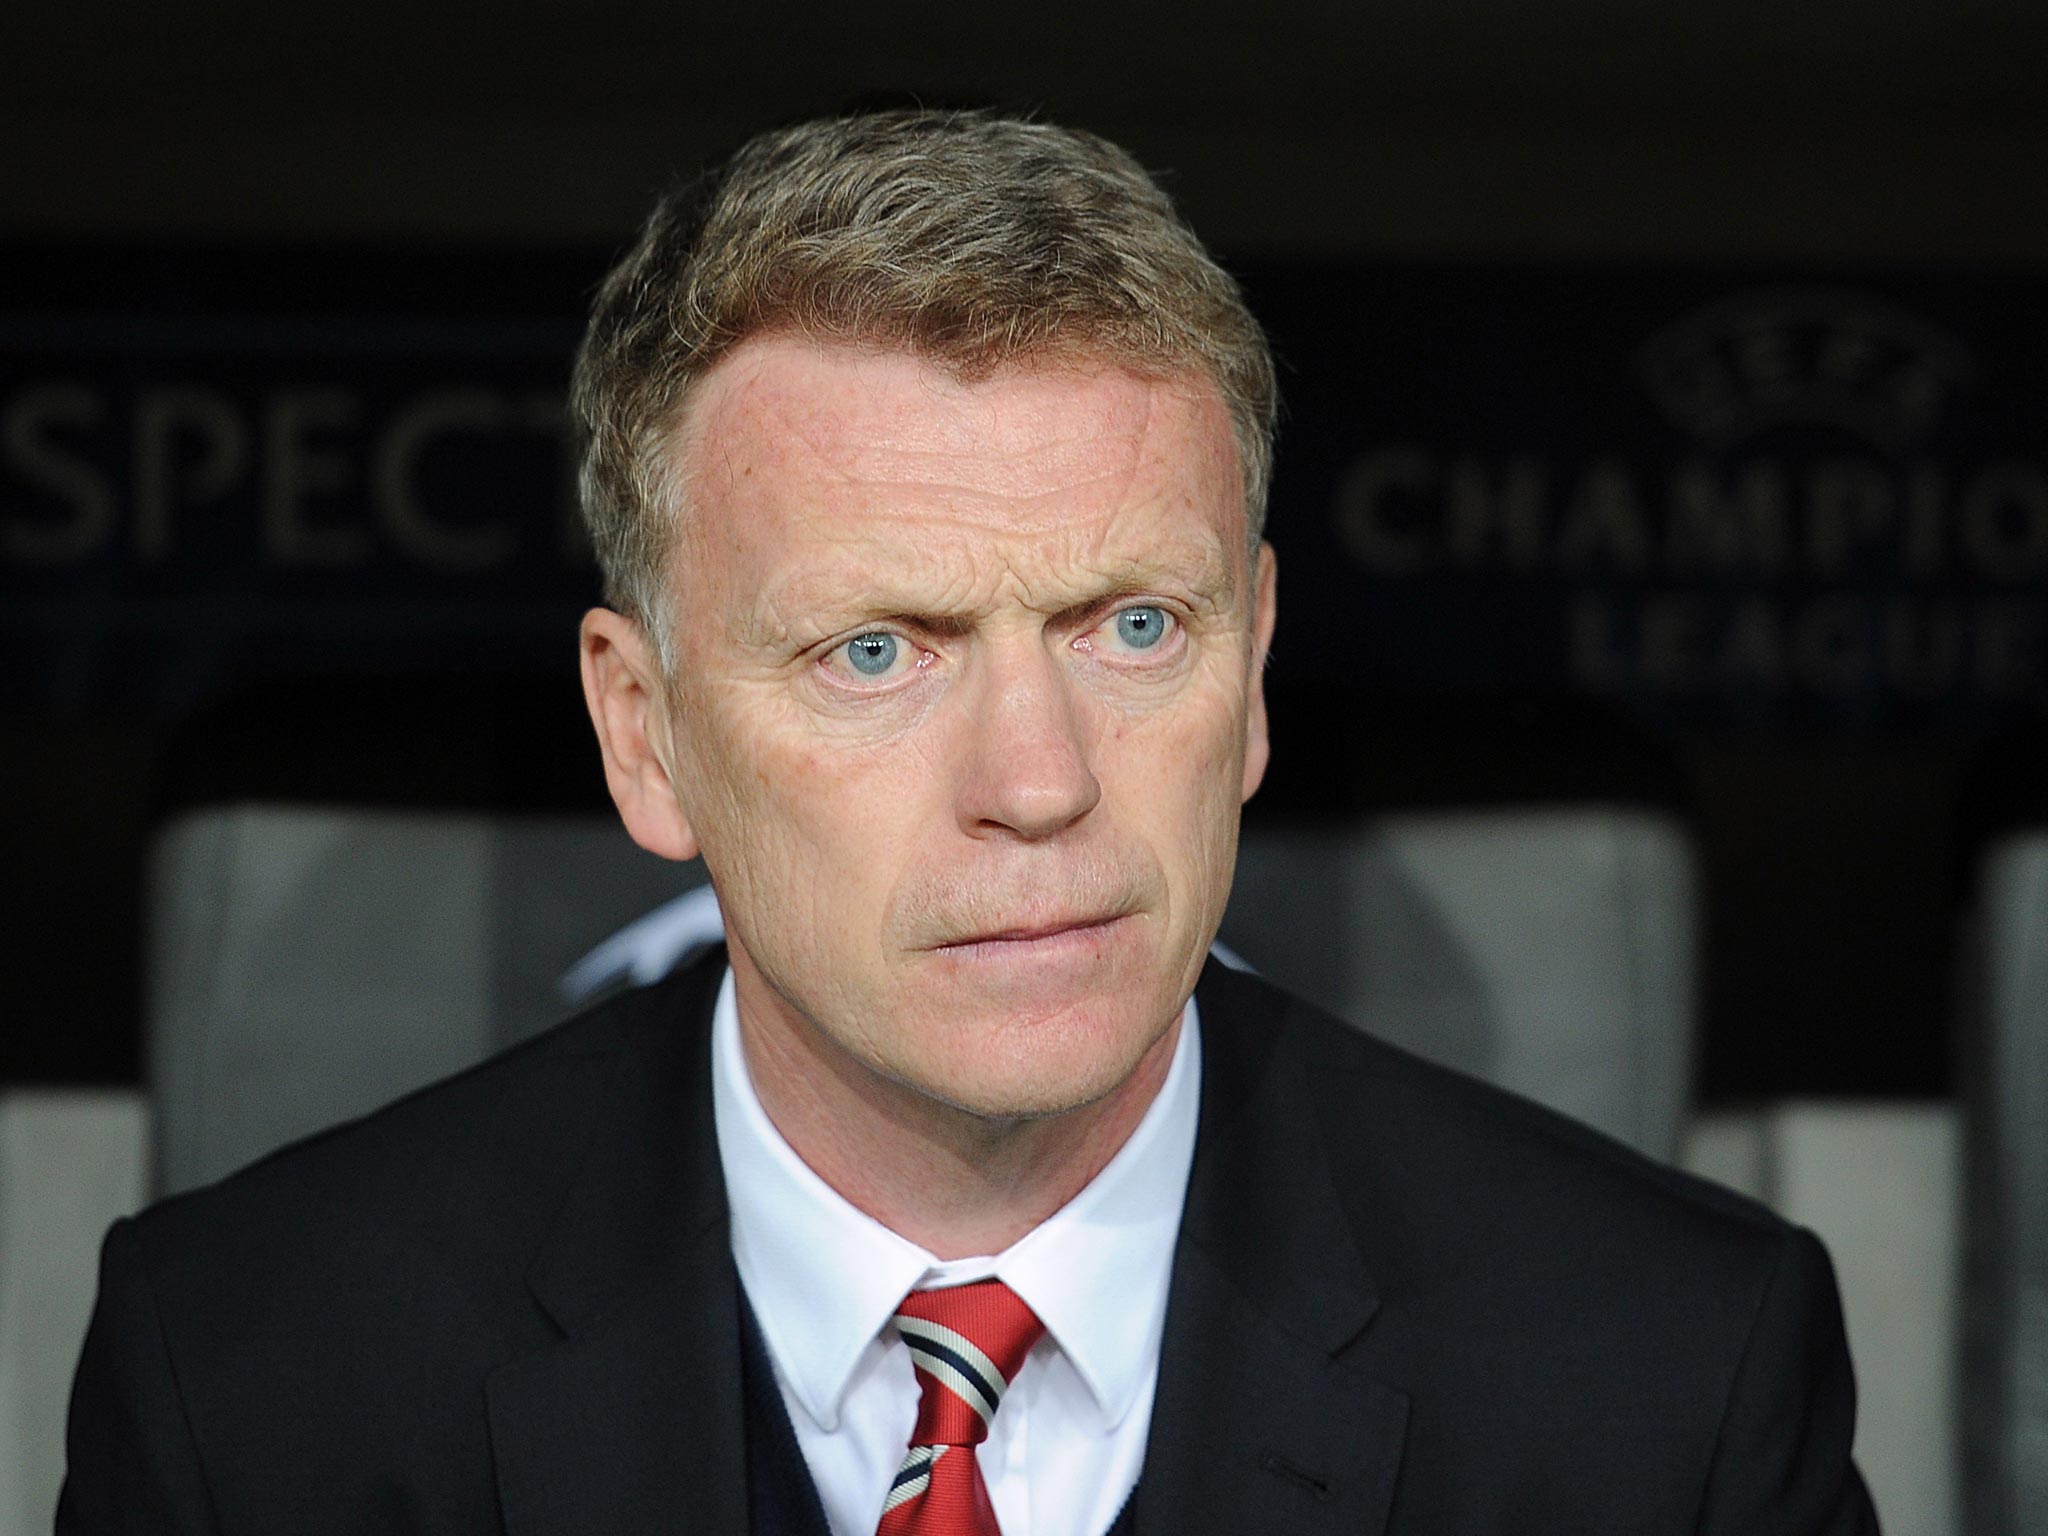 David Moyes received £7m following his brief stint as
Manchester United manager